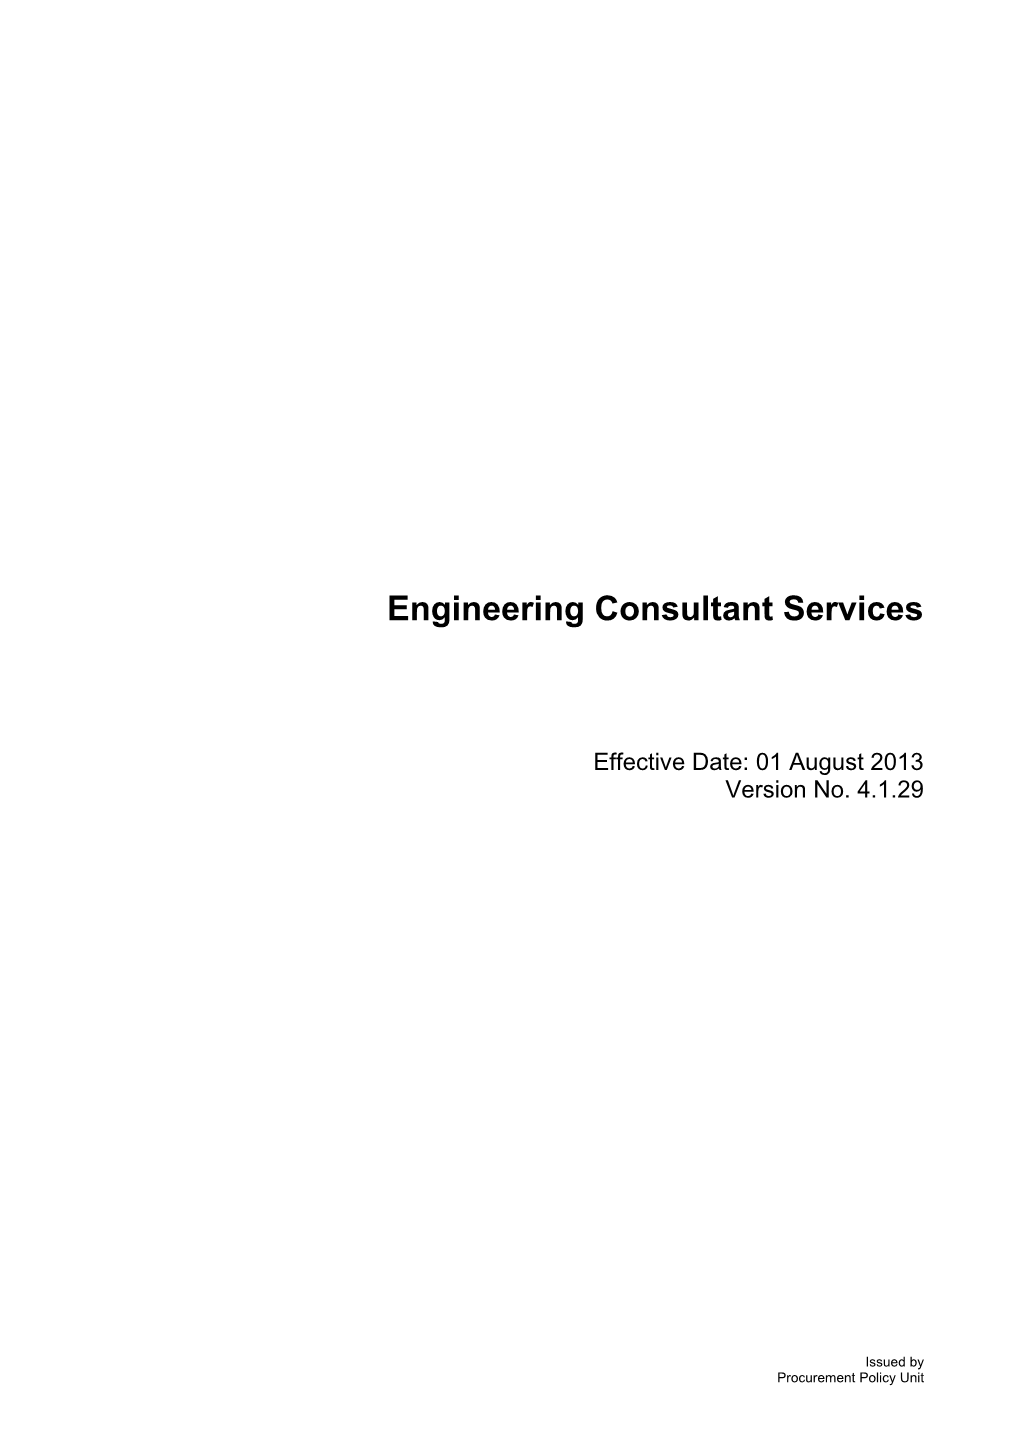 Engineering Consultant Services - V 4.1.29 (01 August 2013)